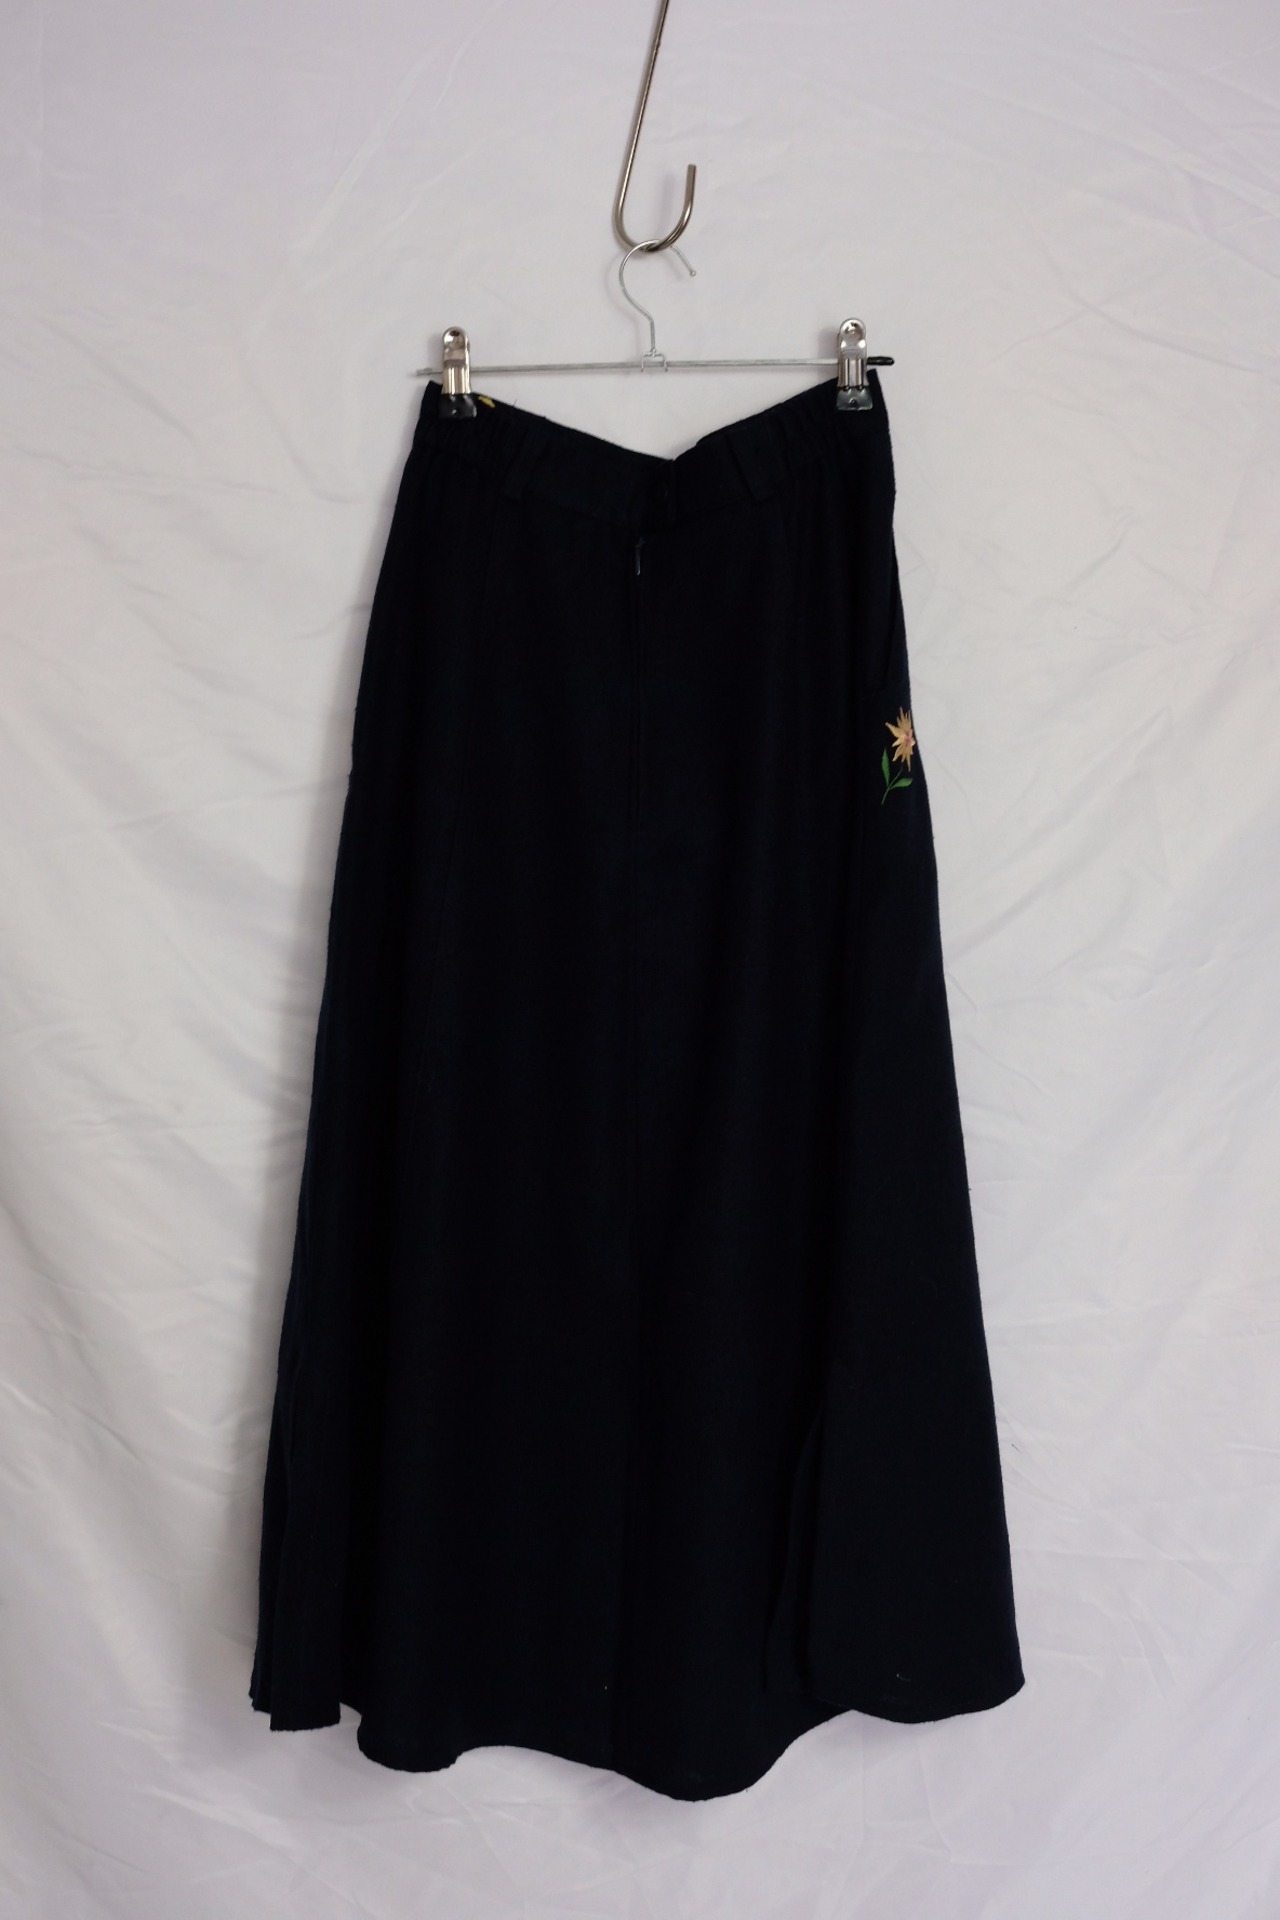 Tyrolean long skirt Made in GERMANY